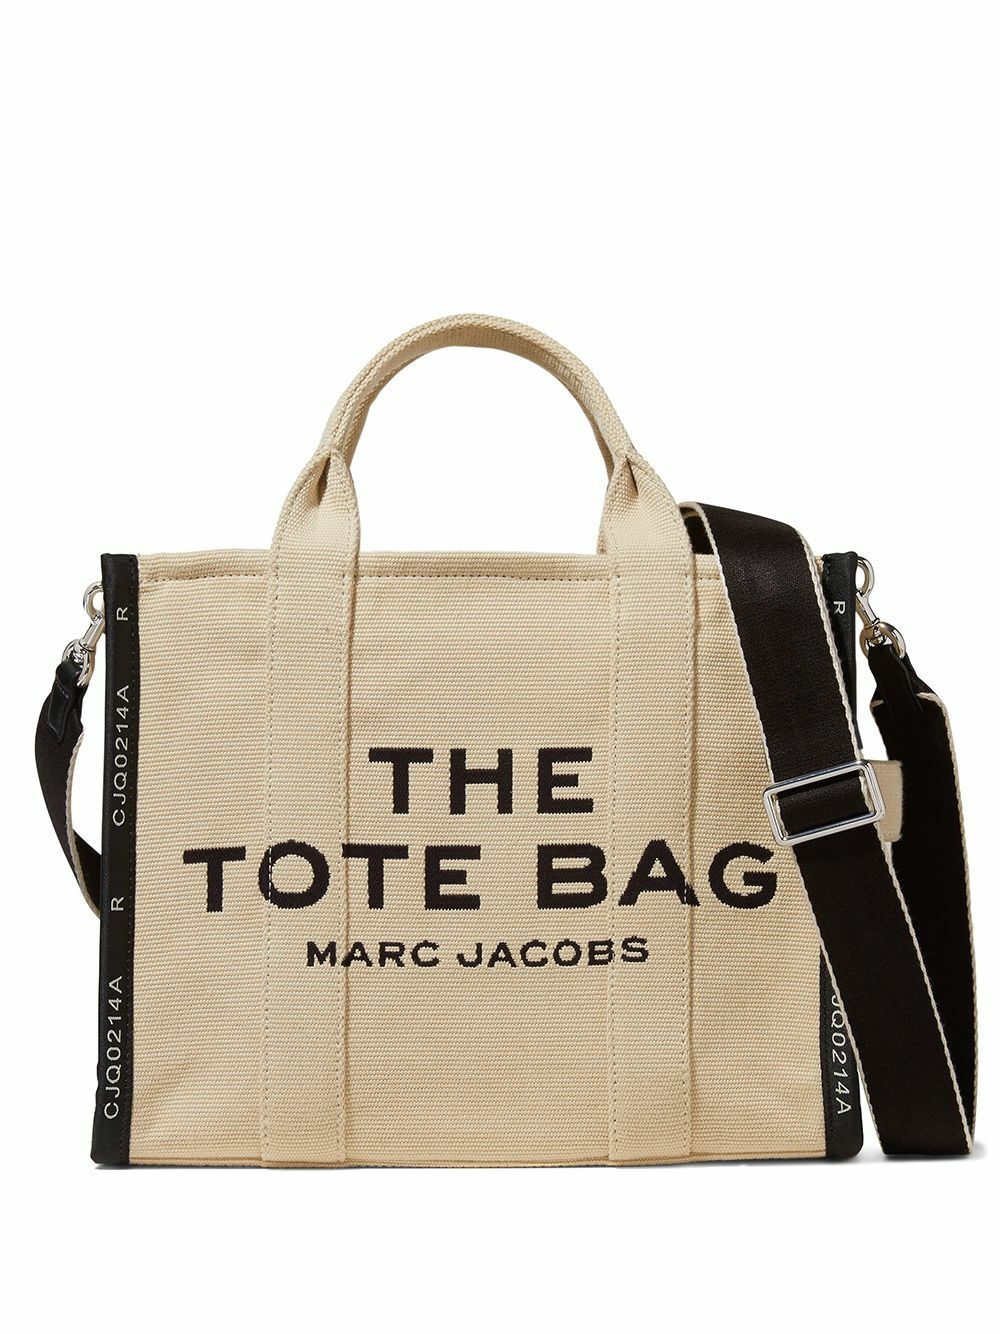 MARC JACOBS - The Tote Medium Canvas Tote Bag Marc Jacobs